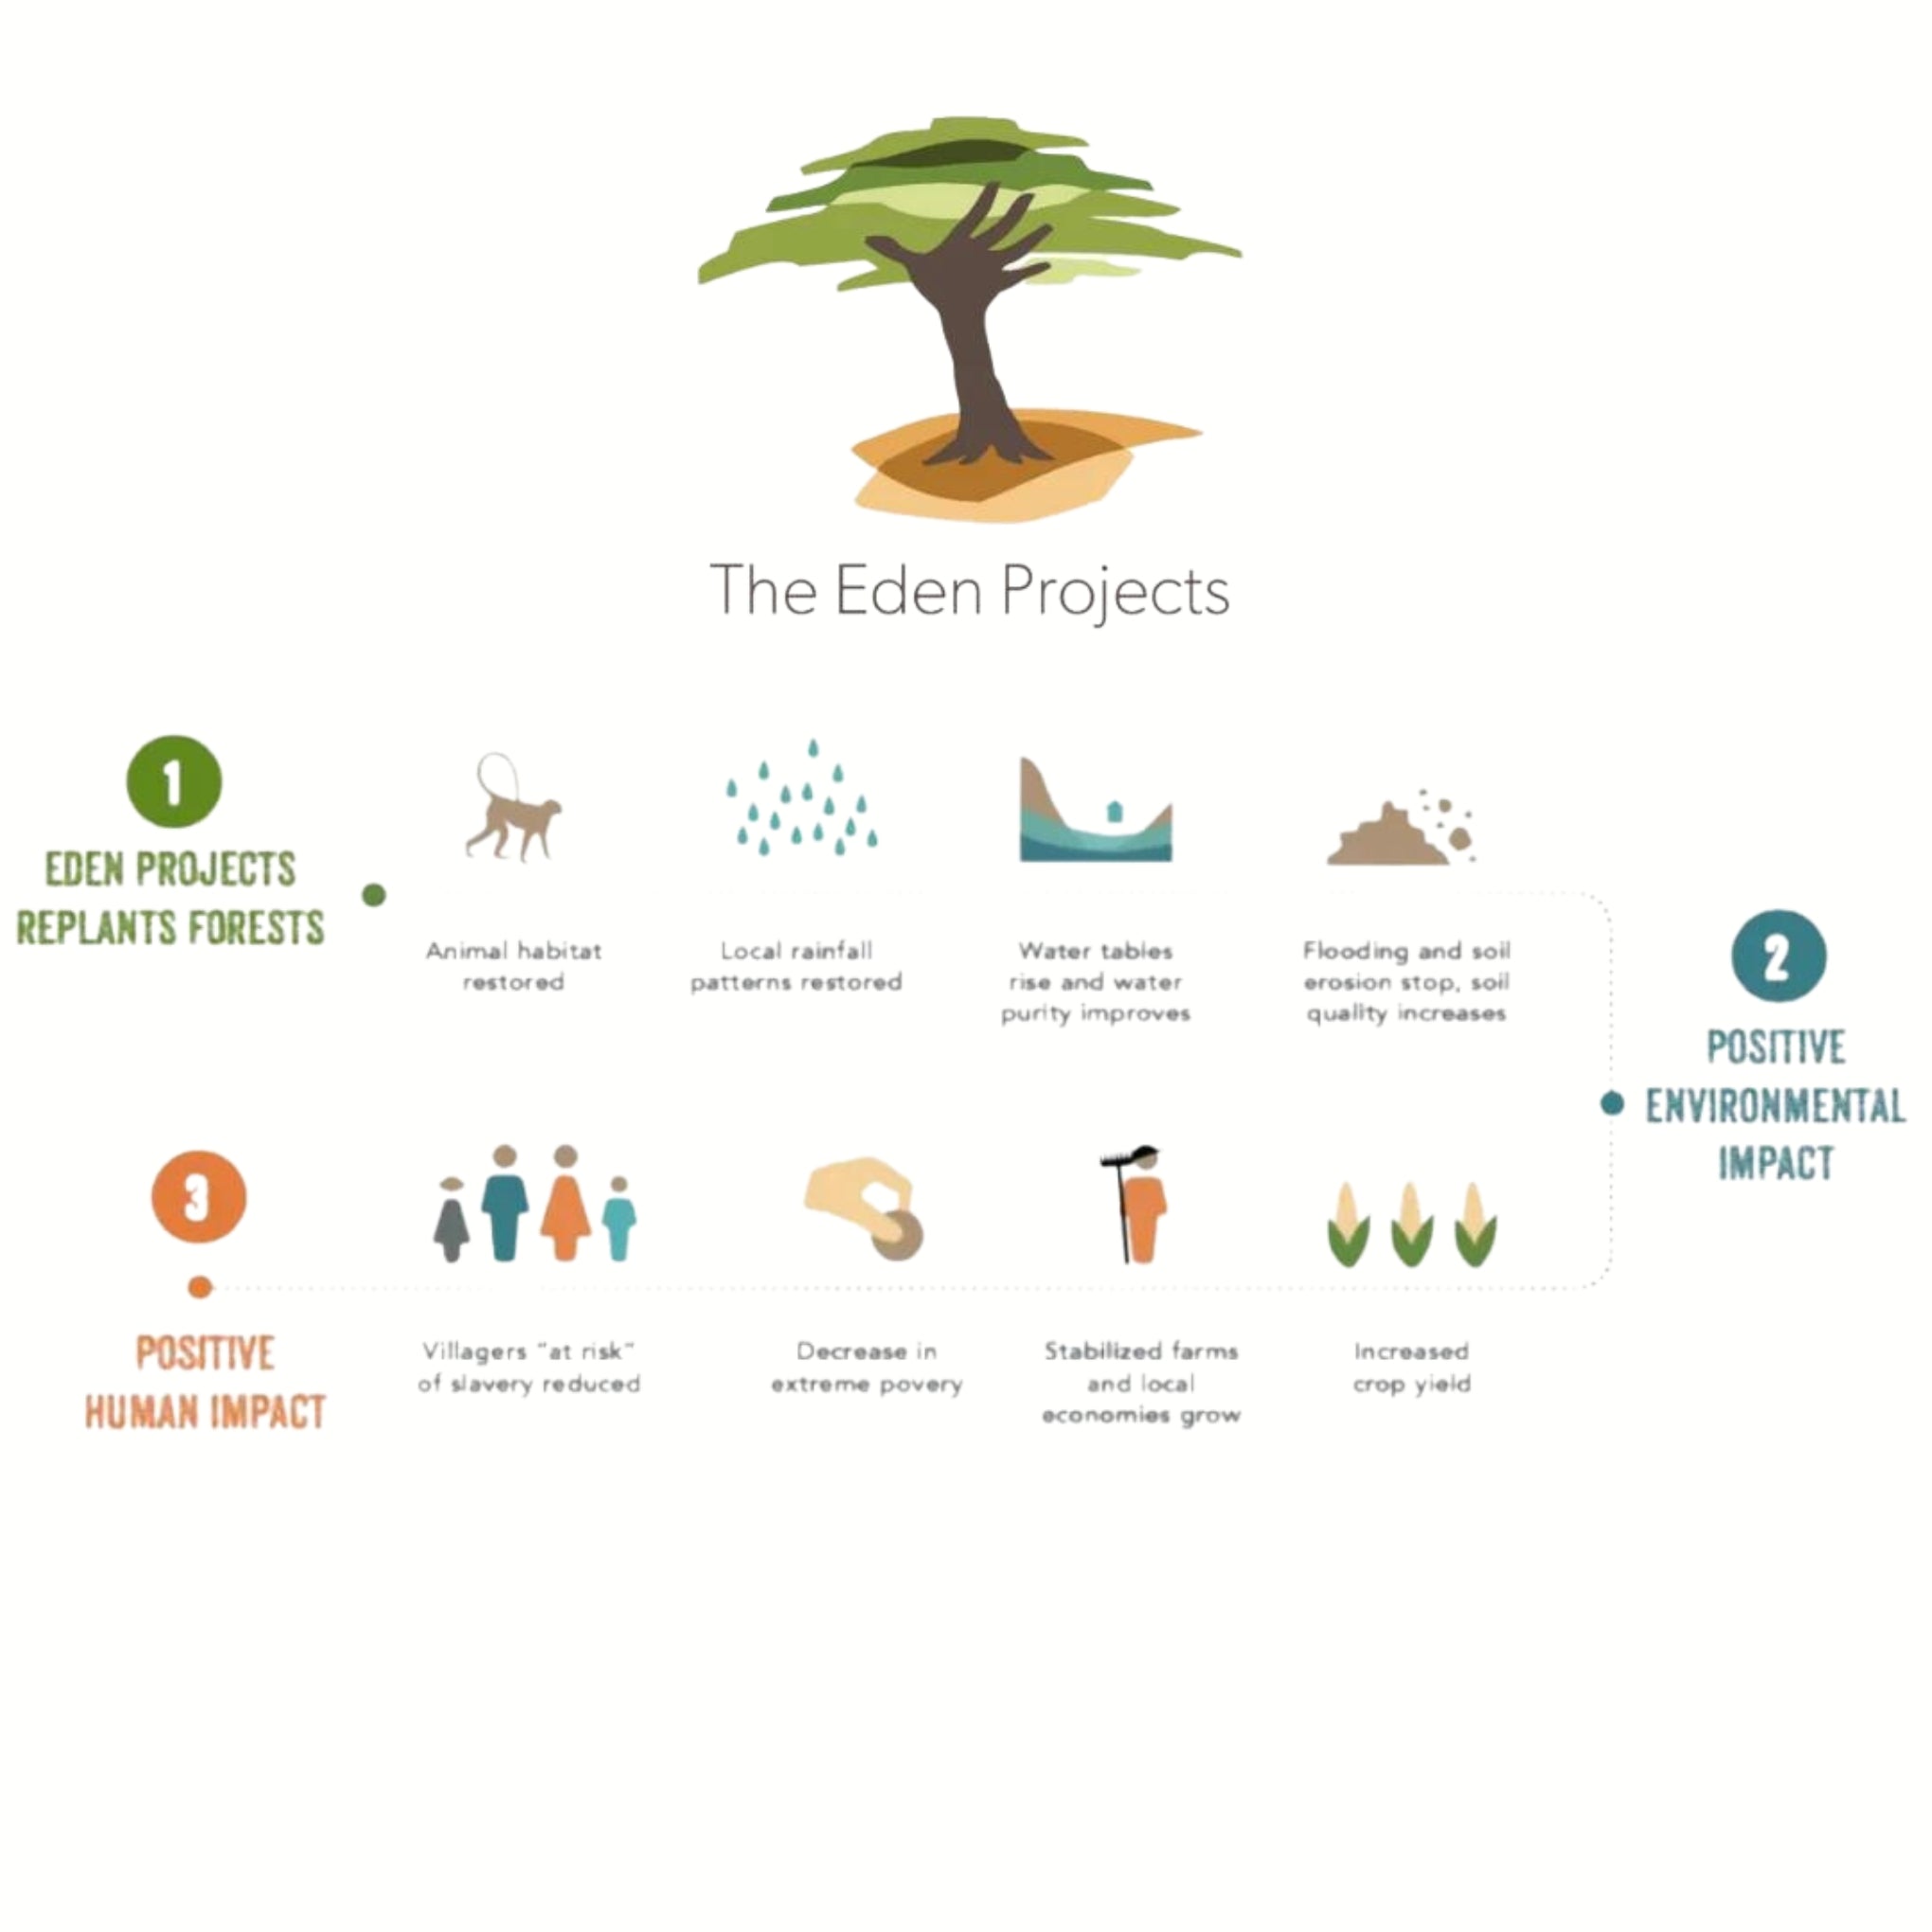 The eden Projects logo and positive impact